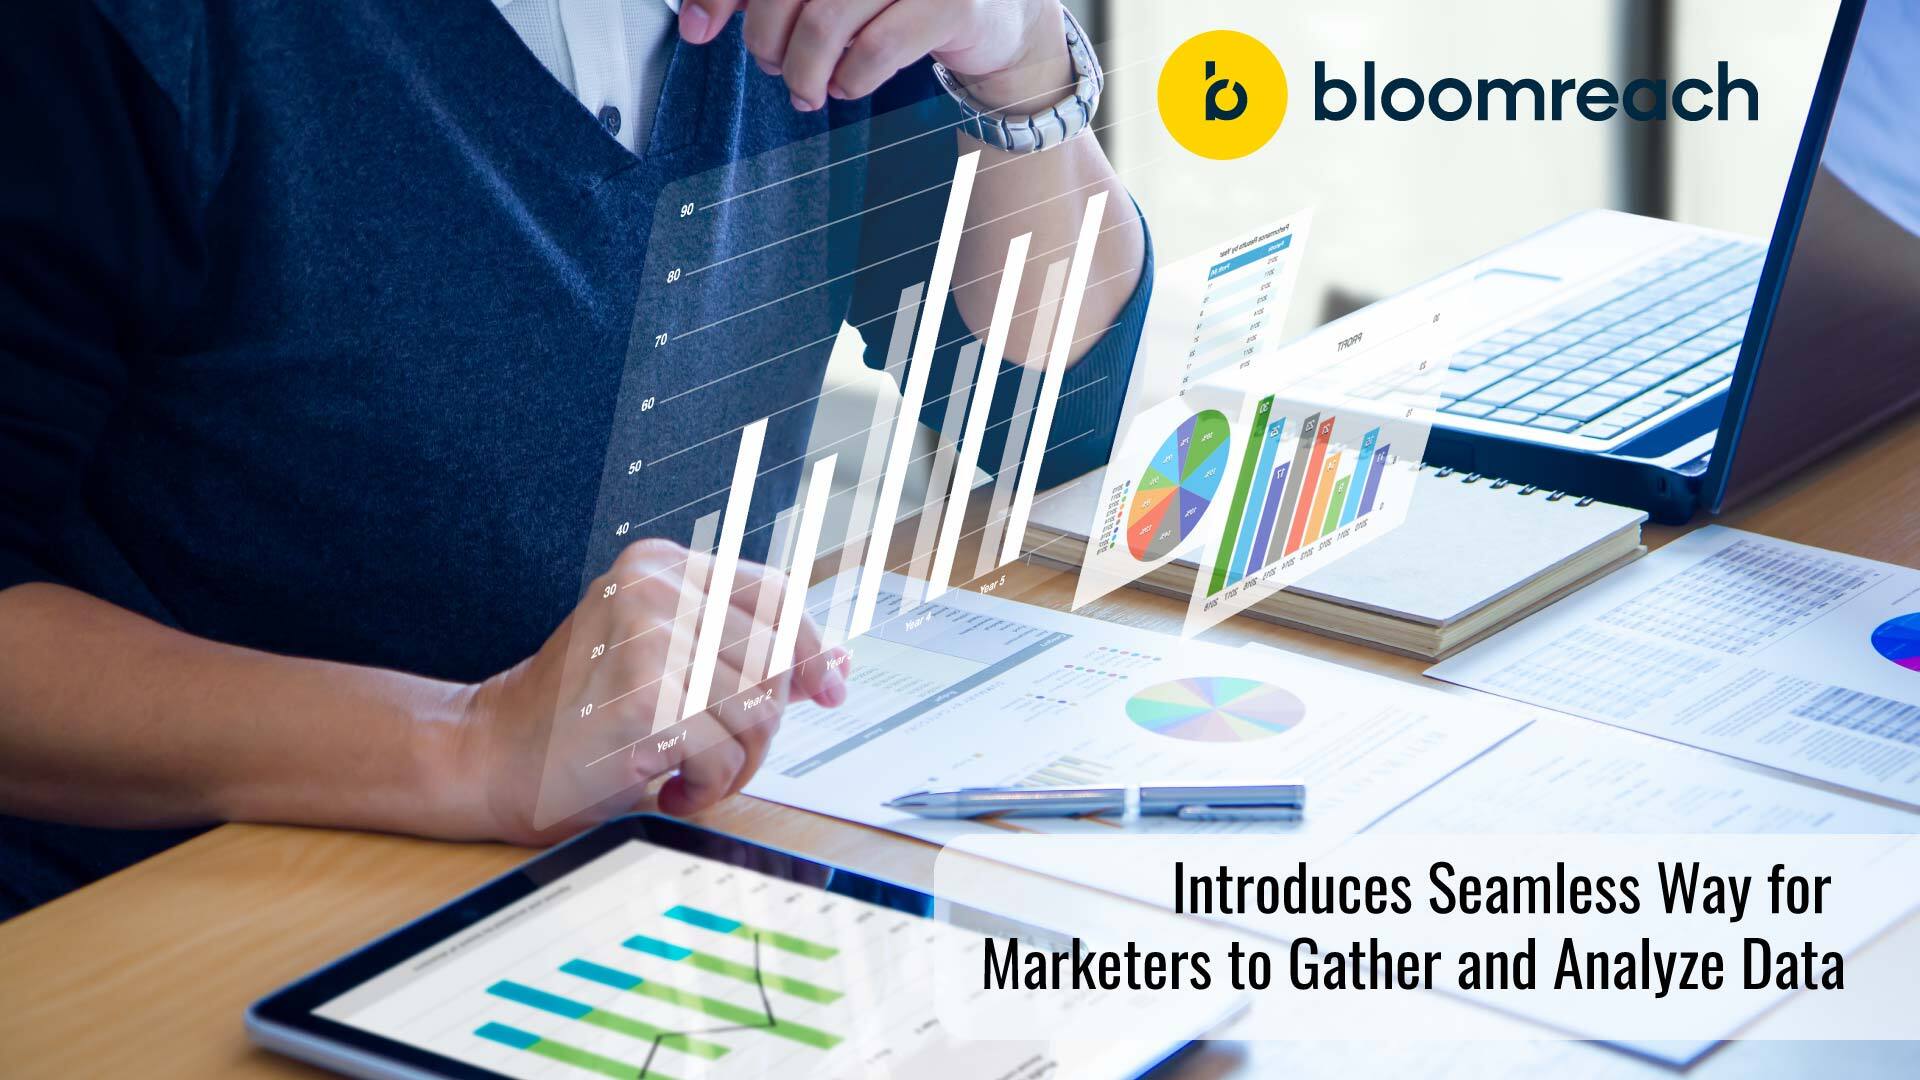 Bloomreach Introduces a Seamless Way for Marketers to Build Data-Driven Reports and Analyses